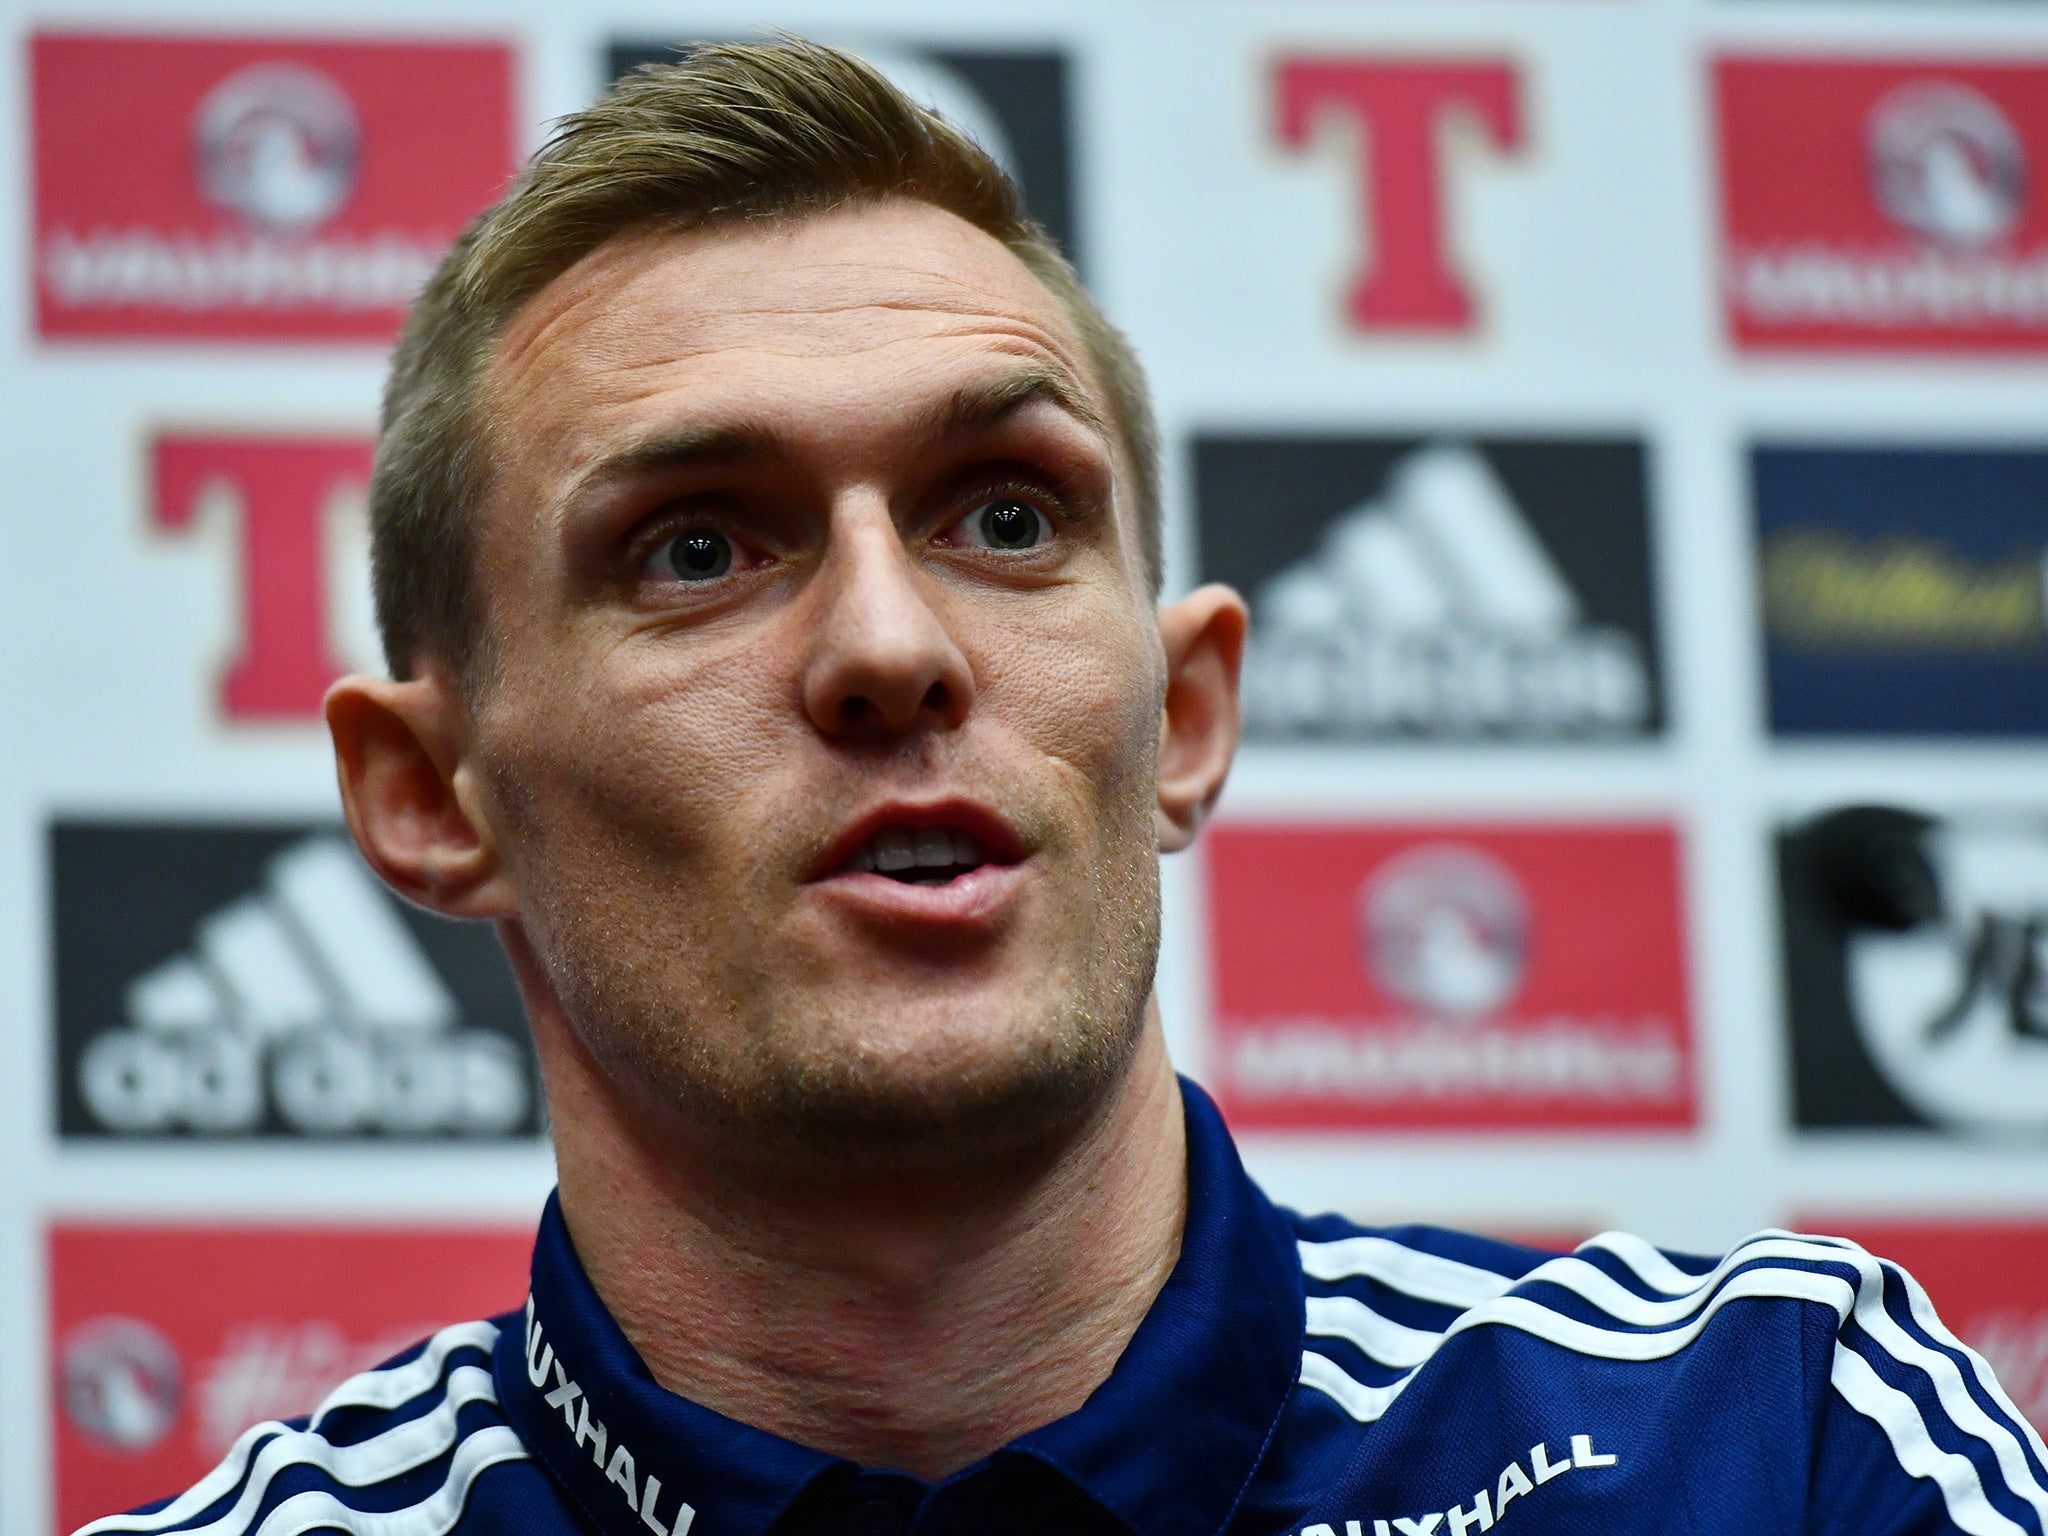 Fletcher believes Scotland can use the Wembley crowd to their advantage